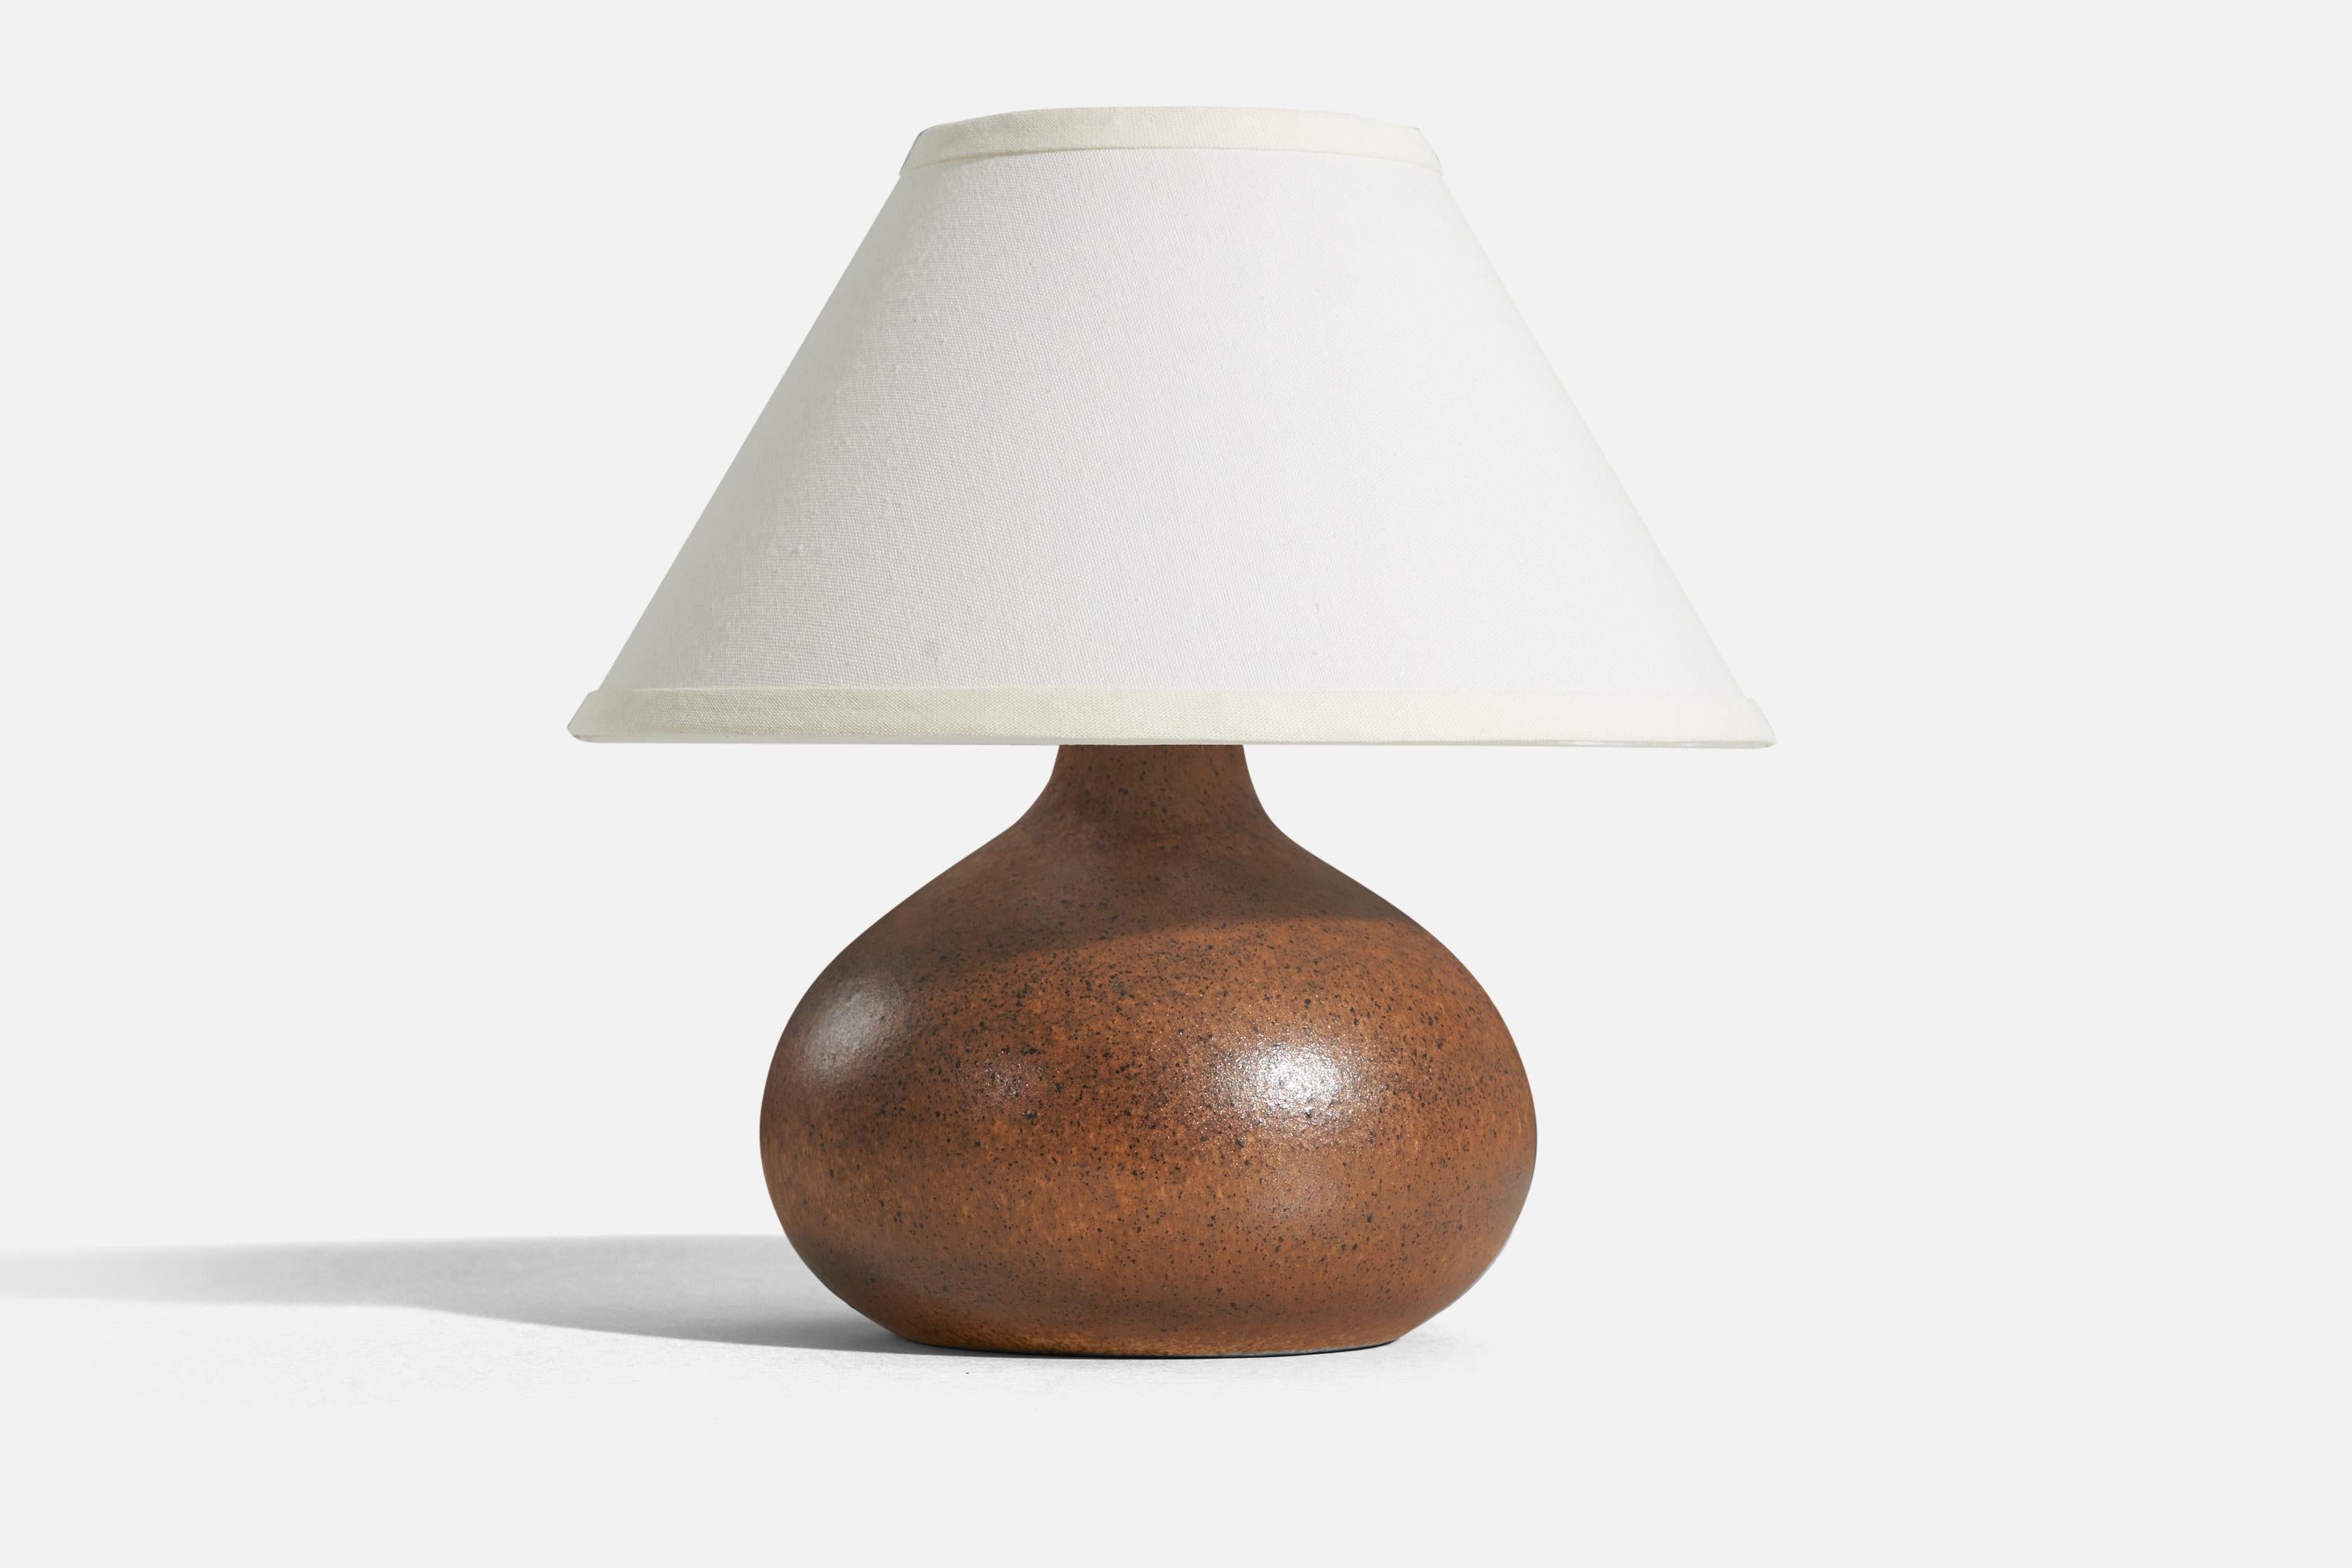 A brown-glazed stoneware table lamp designed by Bruno Karlsson and produced by Ego Stengods, Sweden, c. 1960s. It is stamped and signed on underside.

Sold without lampshade. 
Dimensions of lamp (inches) : 9 x 7.5 x 7.5 (H x W x D)
Dimensions of